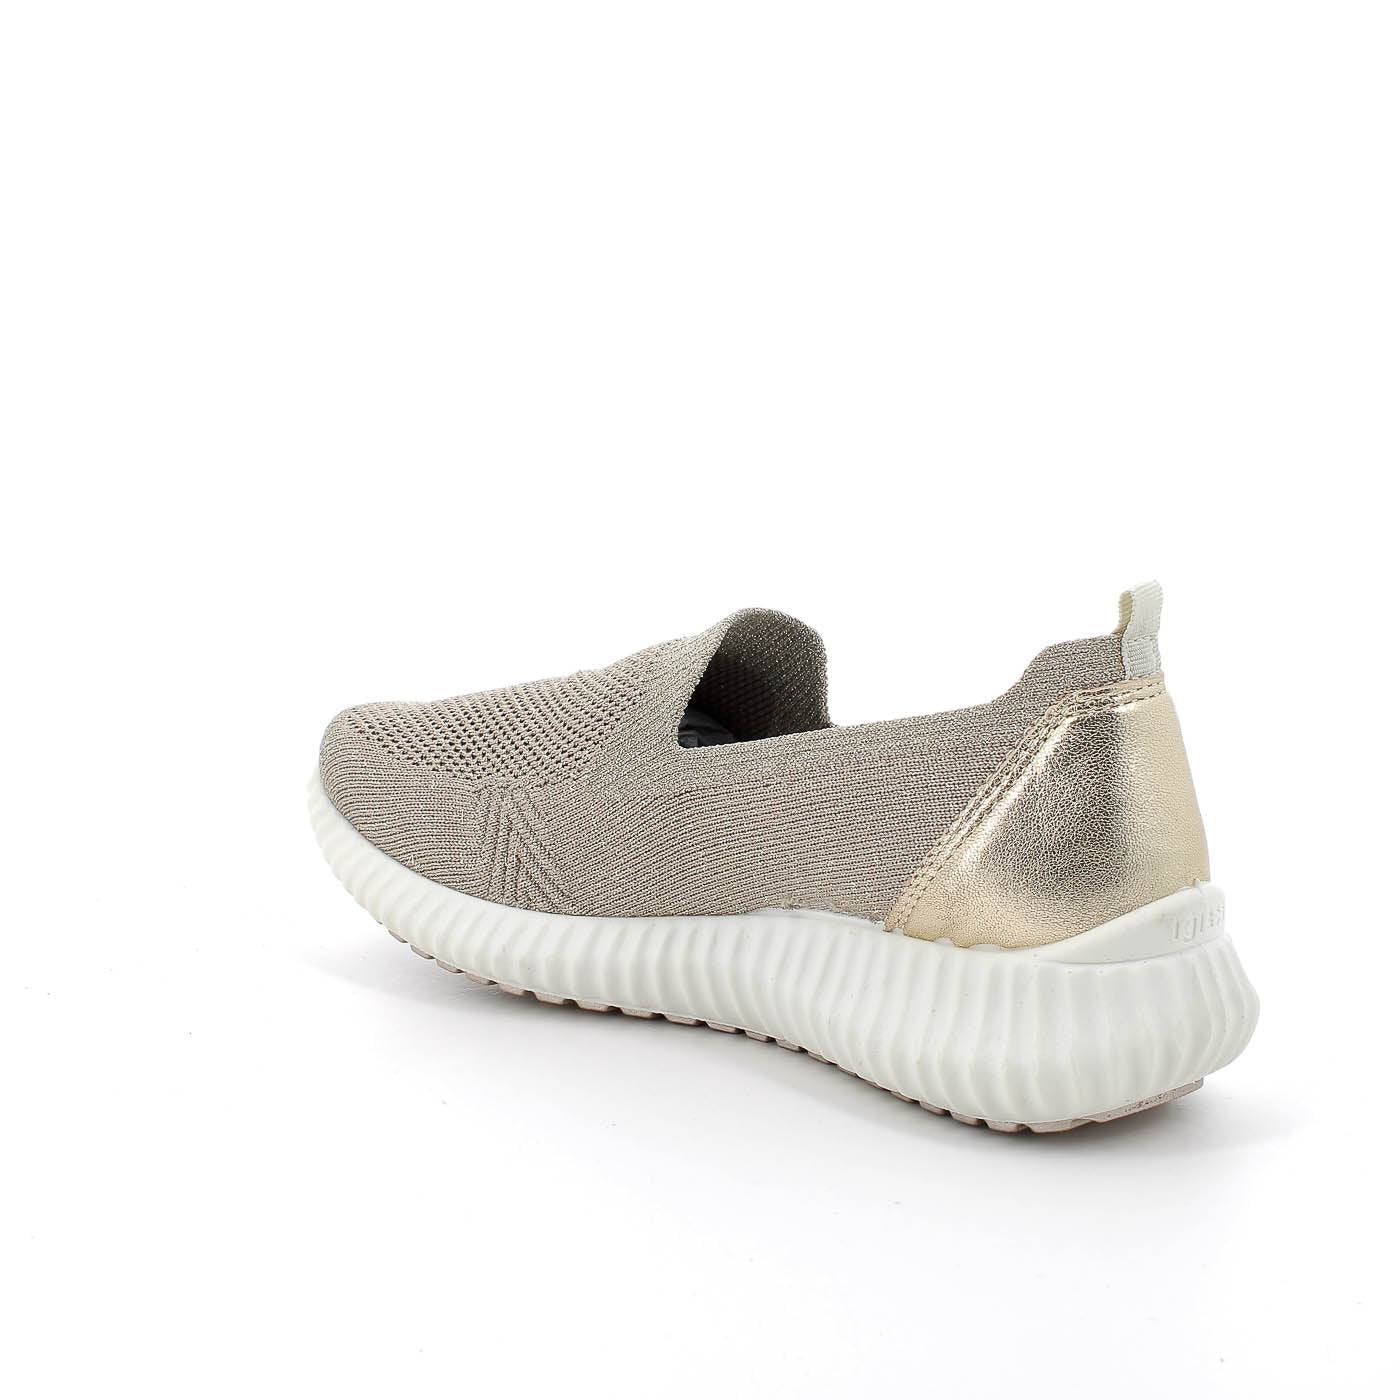 IGI & Co Taupe Knit Runner Sneakers with Reflective Gold Detail - Italian Comfort Shoes